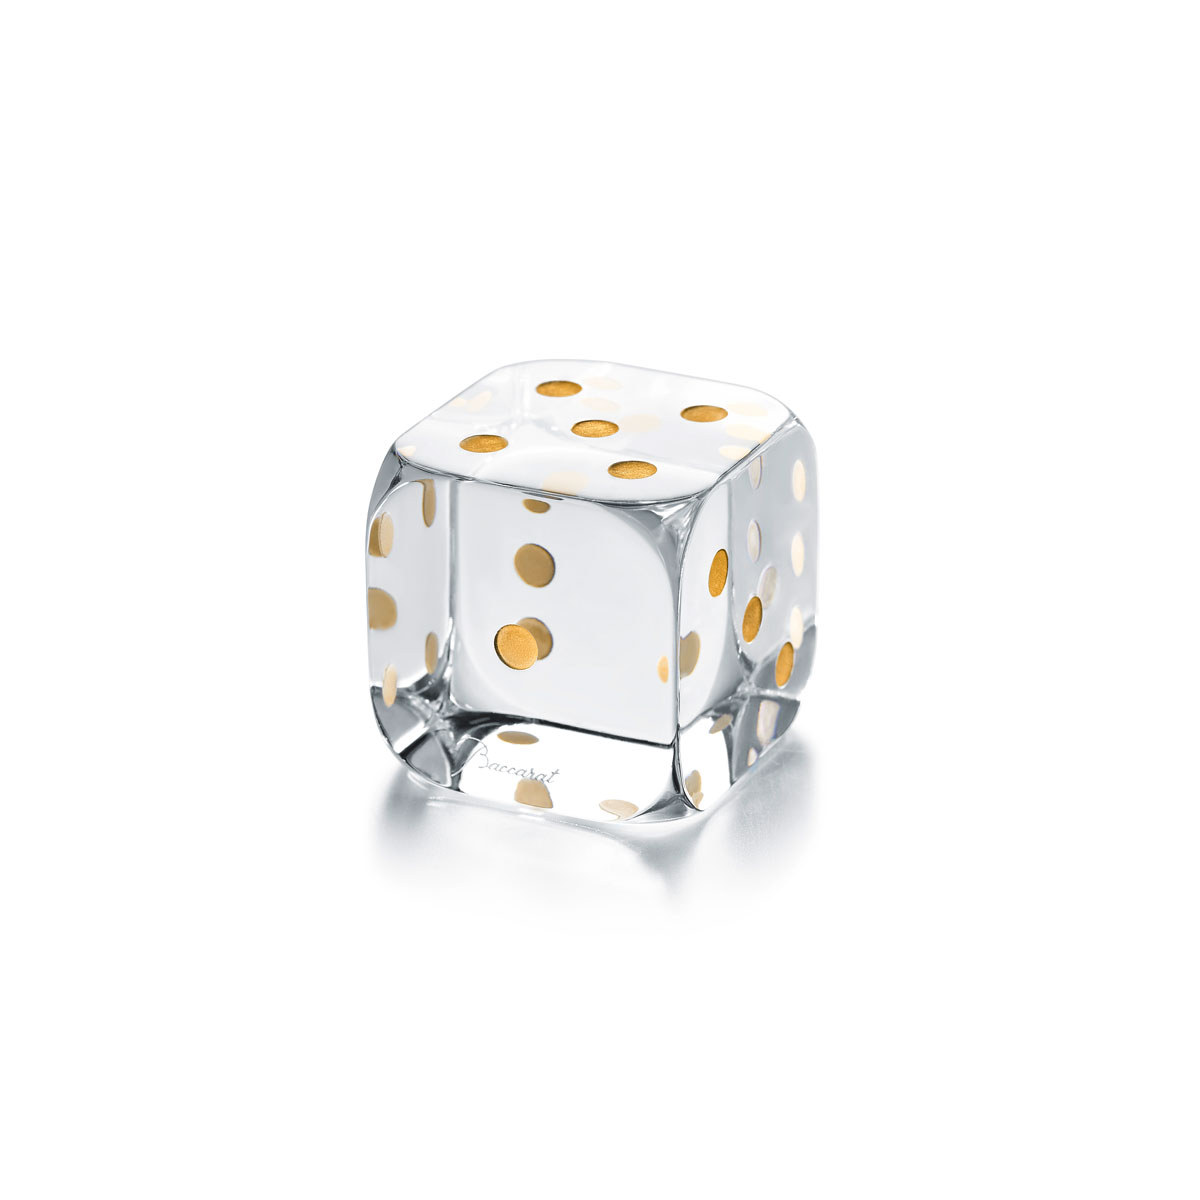 Baccarat Dice Paperweight